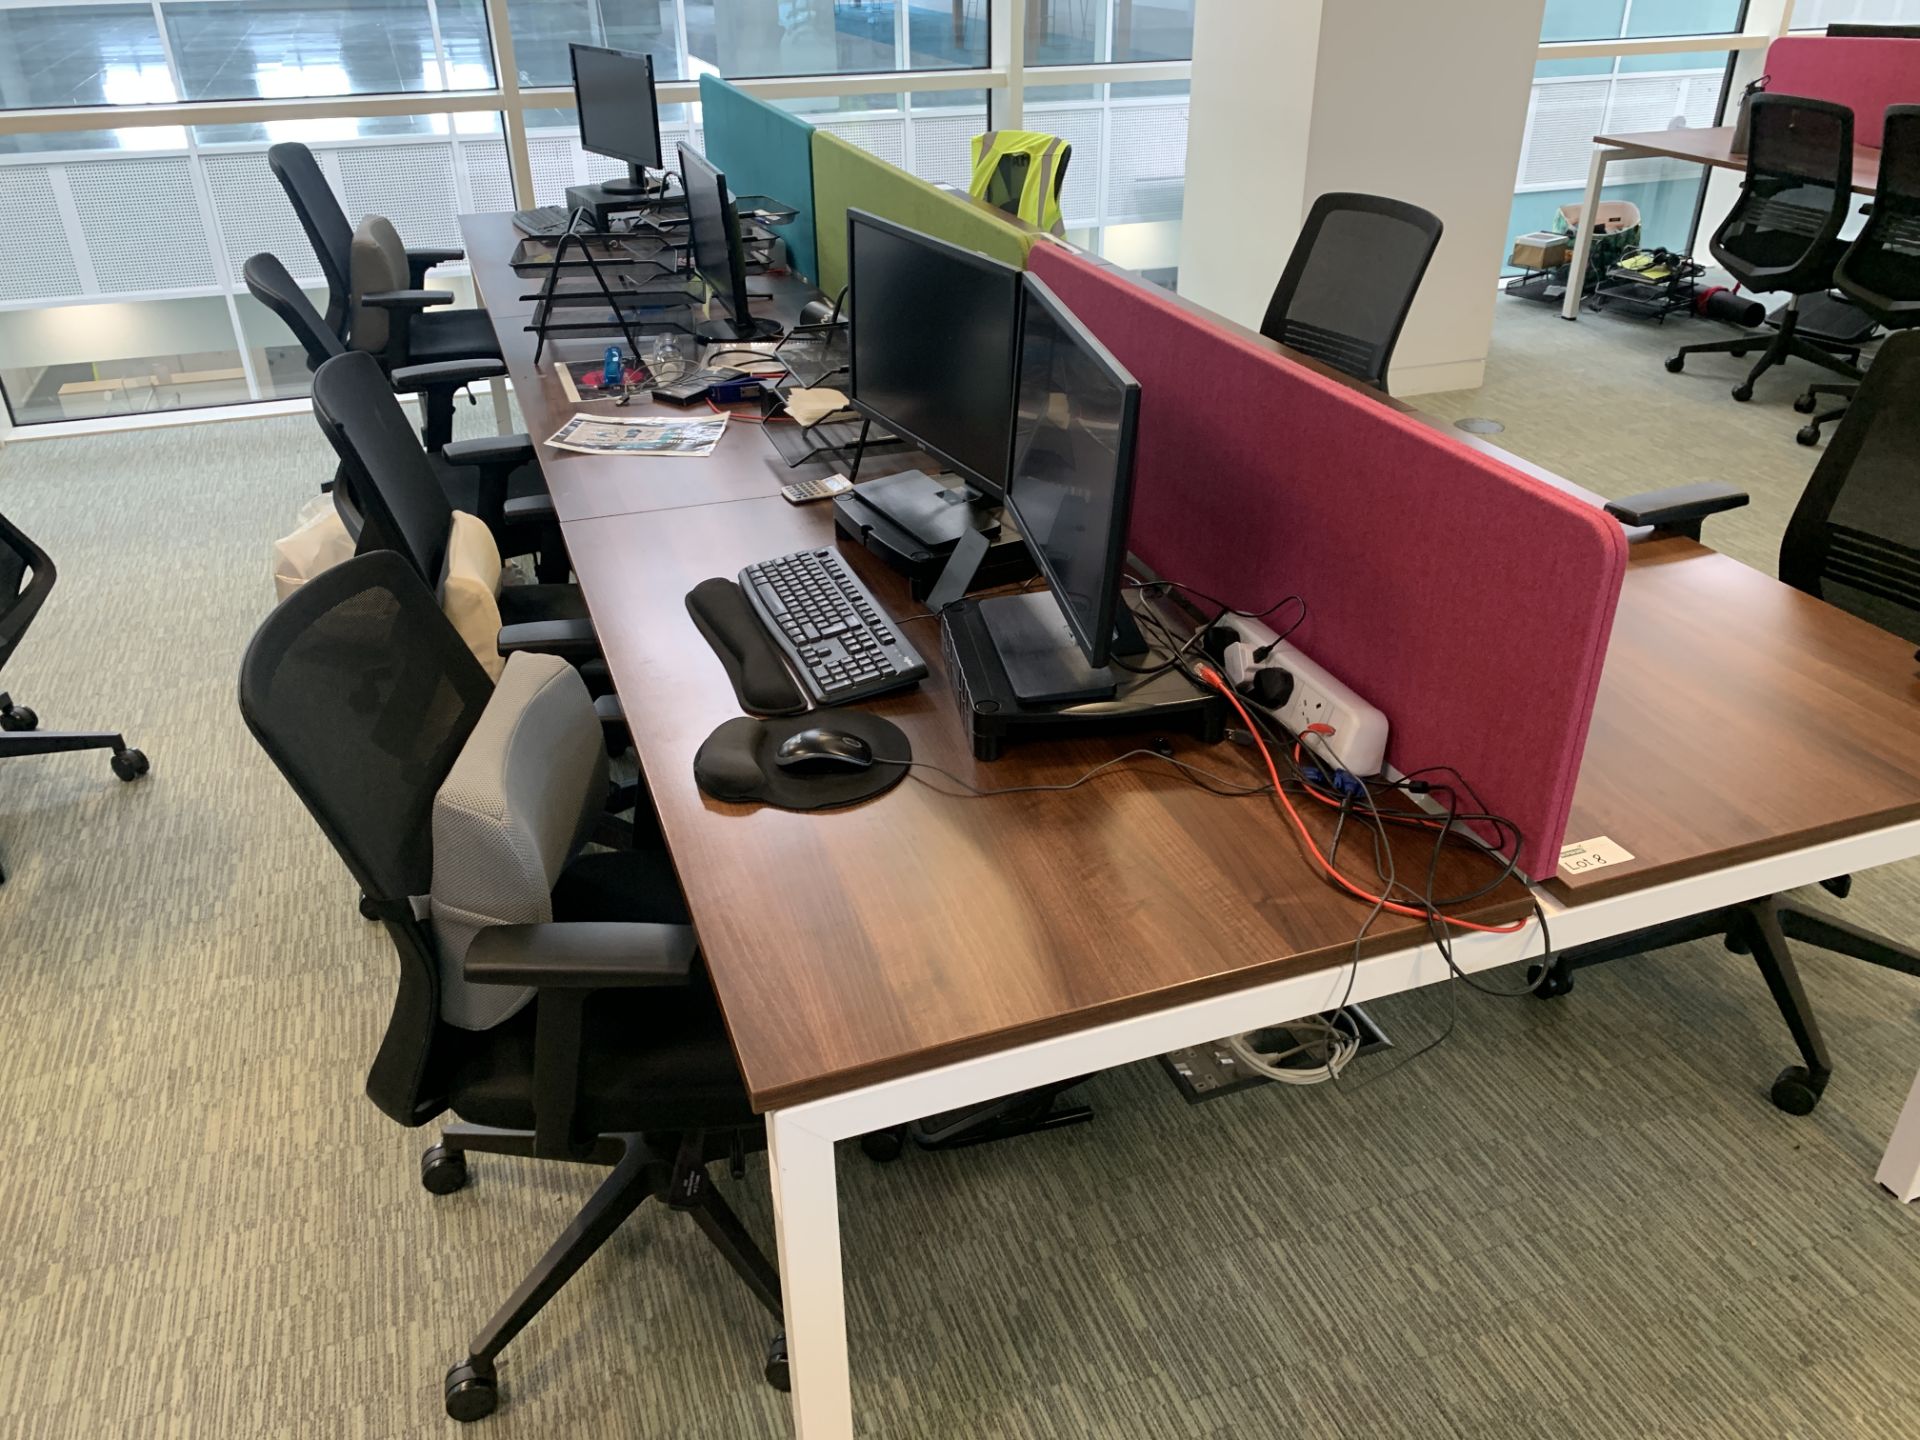 BAY OF 6 HIGH END OFFICE DESKS (CONTENTS NOT INCLUDED) - Image 2 of 2